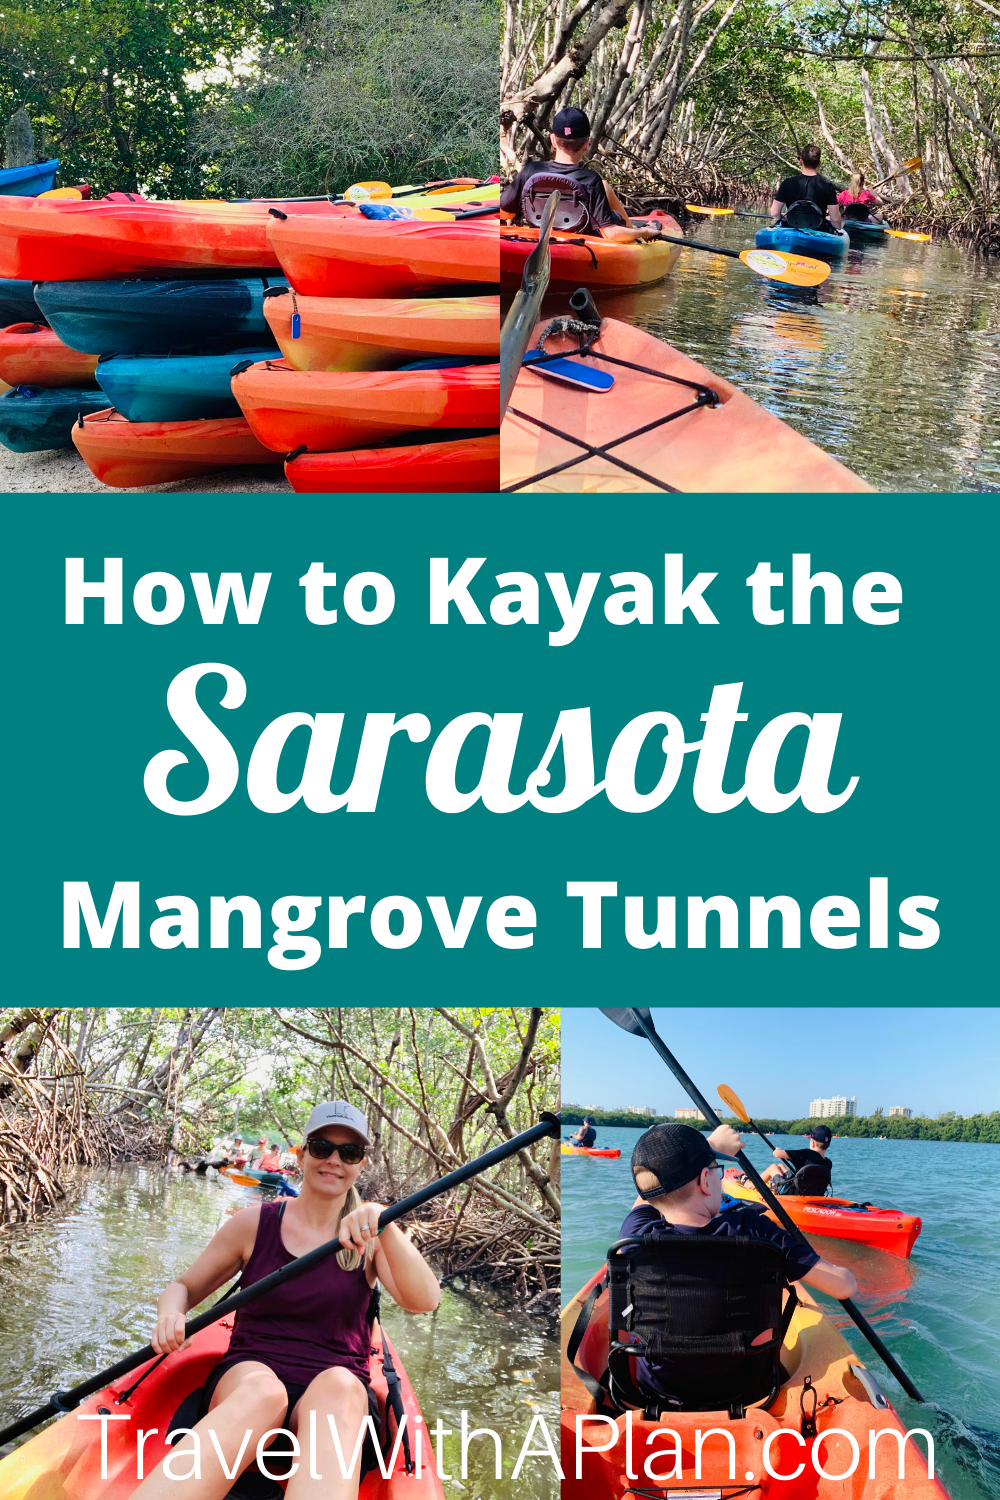 Check out our awesome guide to Sarasota Kayak Tours from Top US Family Travel Blog, Travel With A Plan! 